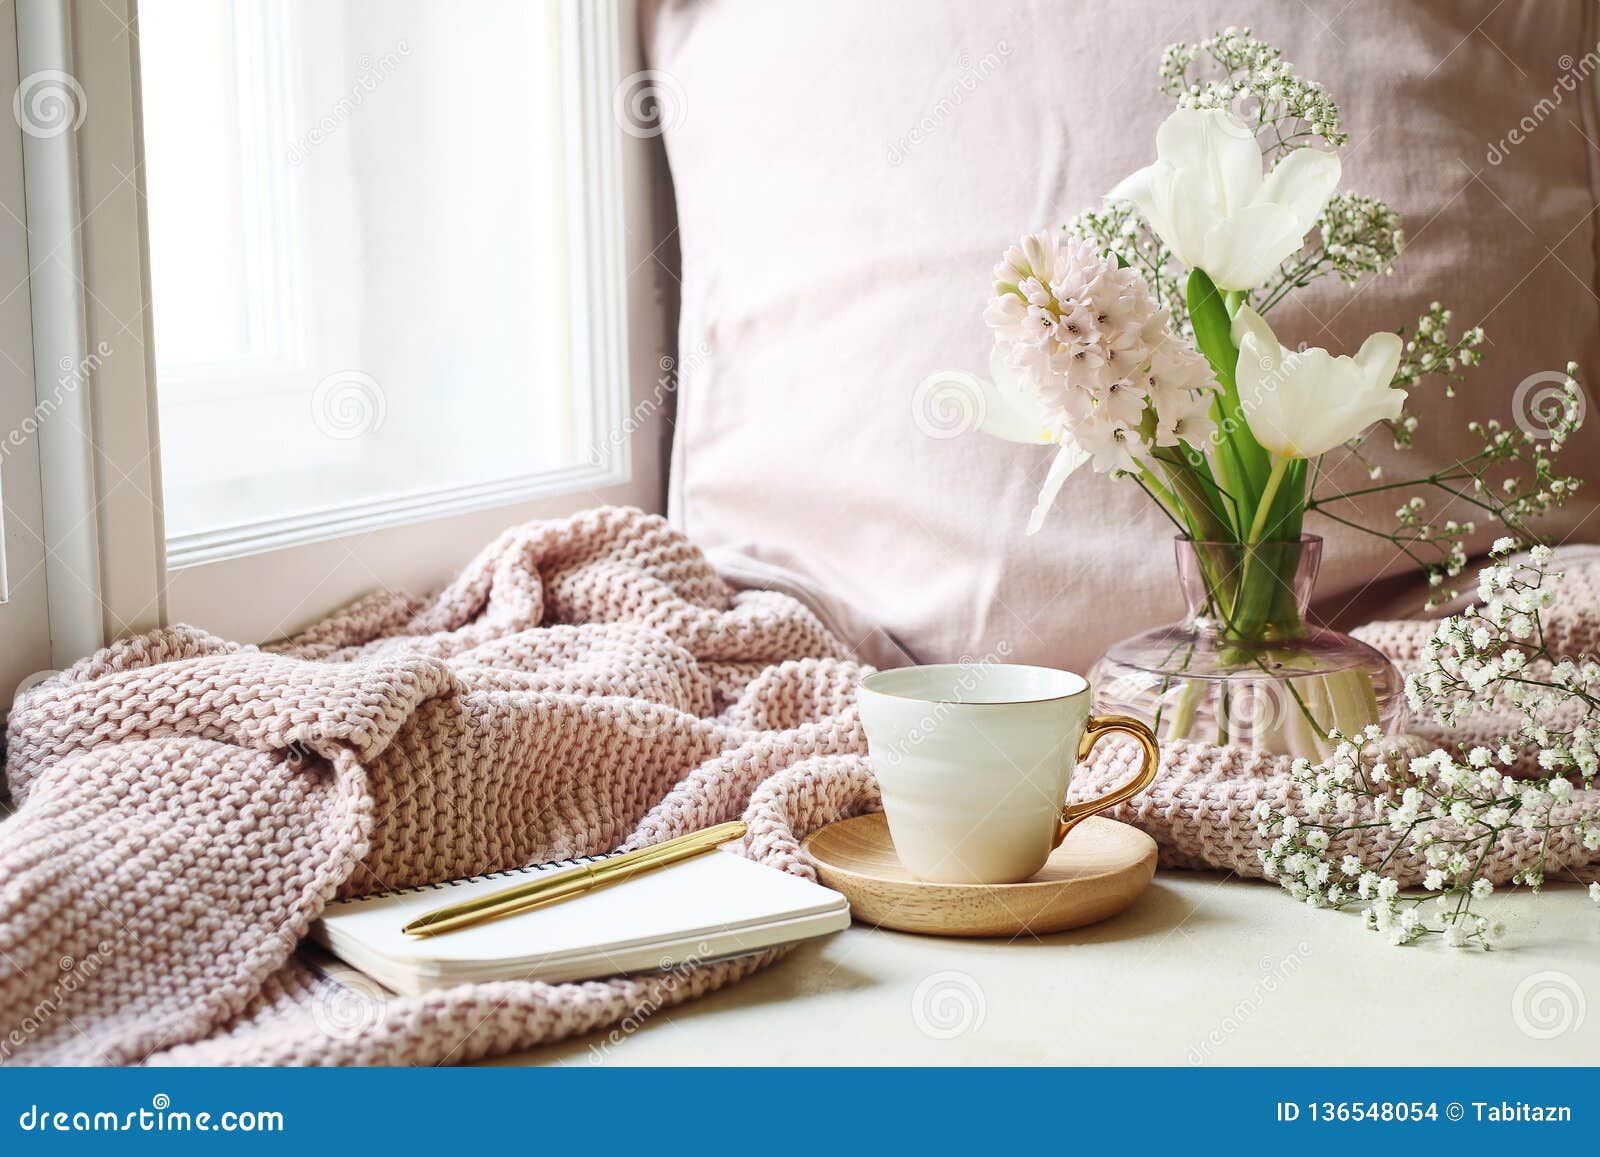 cozy easter, spring still life scene. cup of coffee, opened notebook, pink knitted plaid on windowsill. vintage feminine